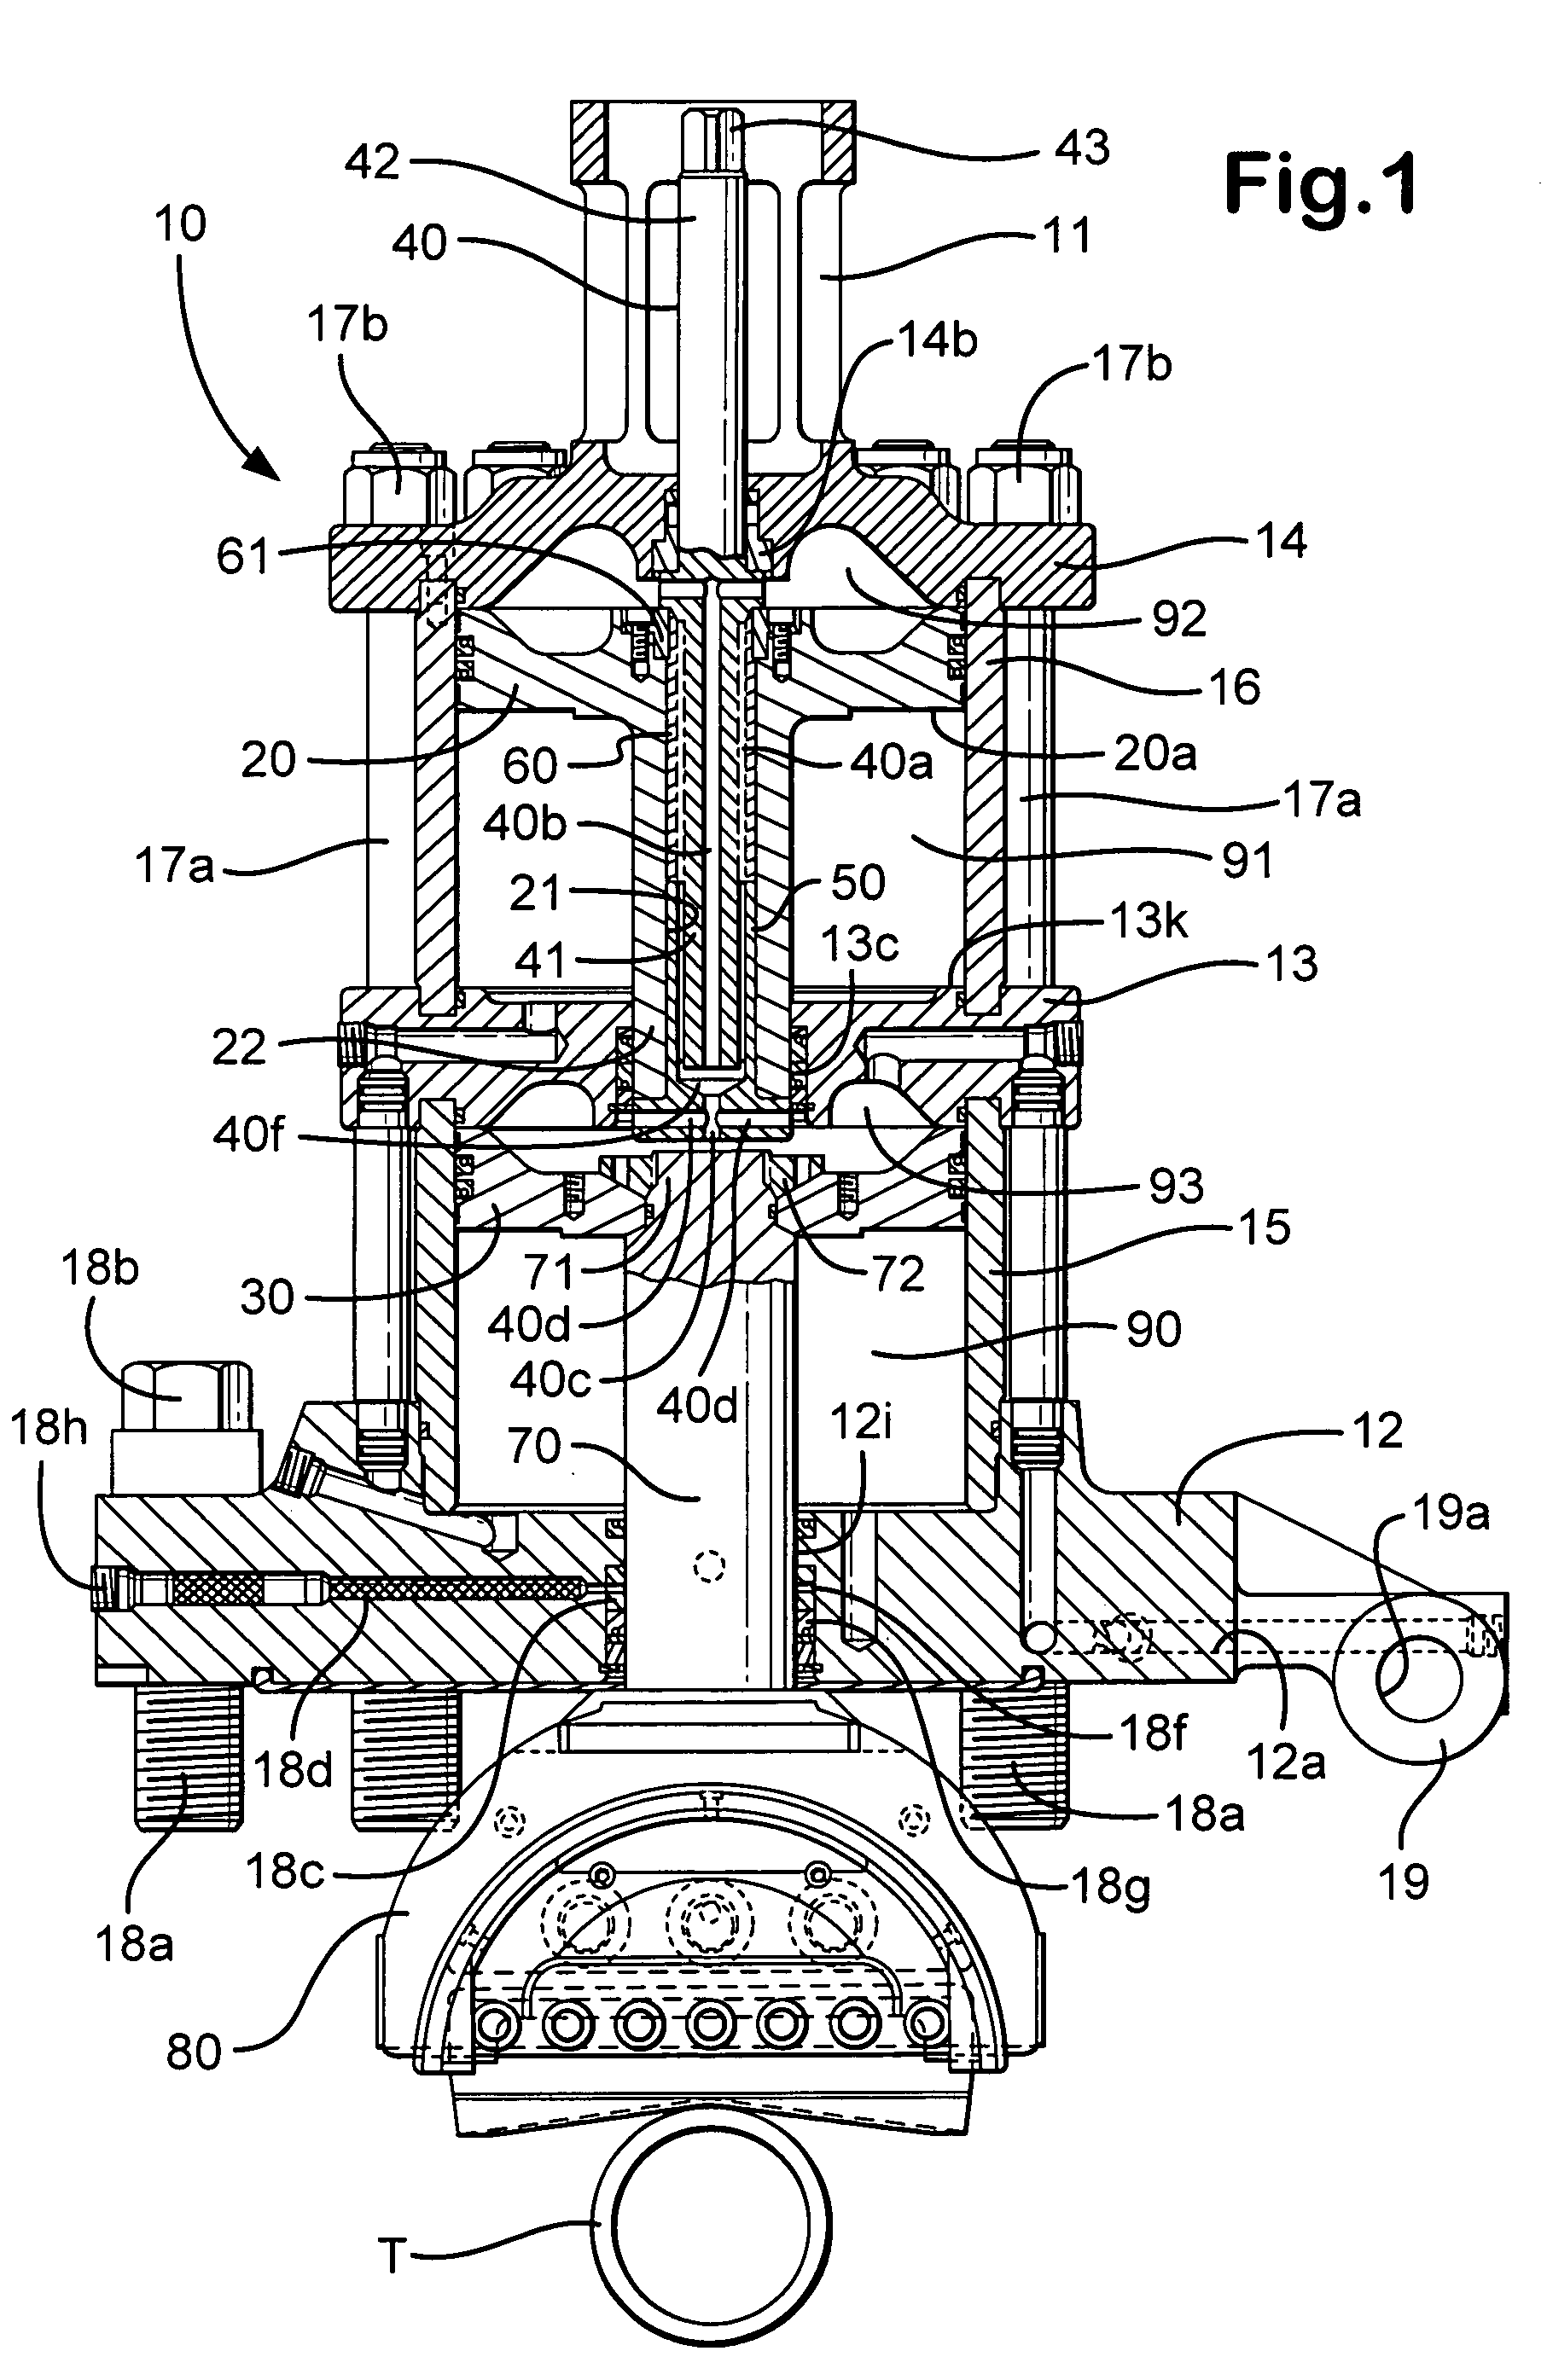 Blowout preventer and ram actuator